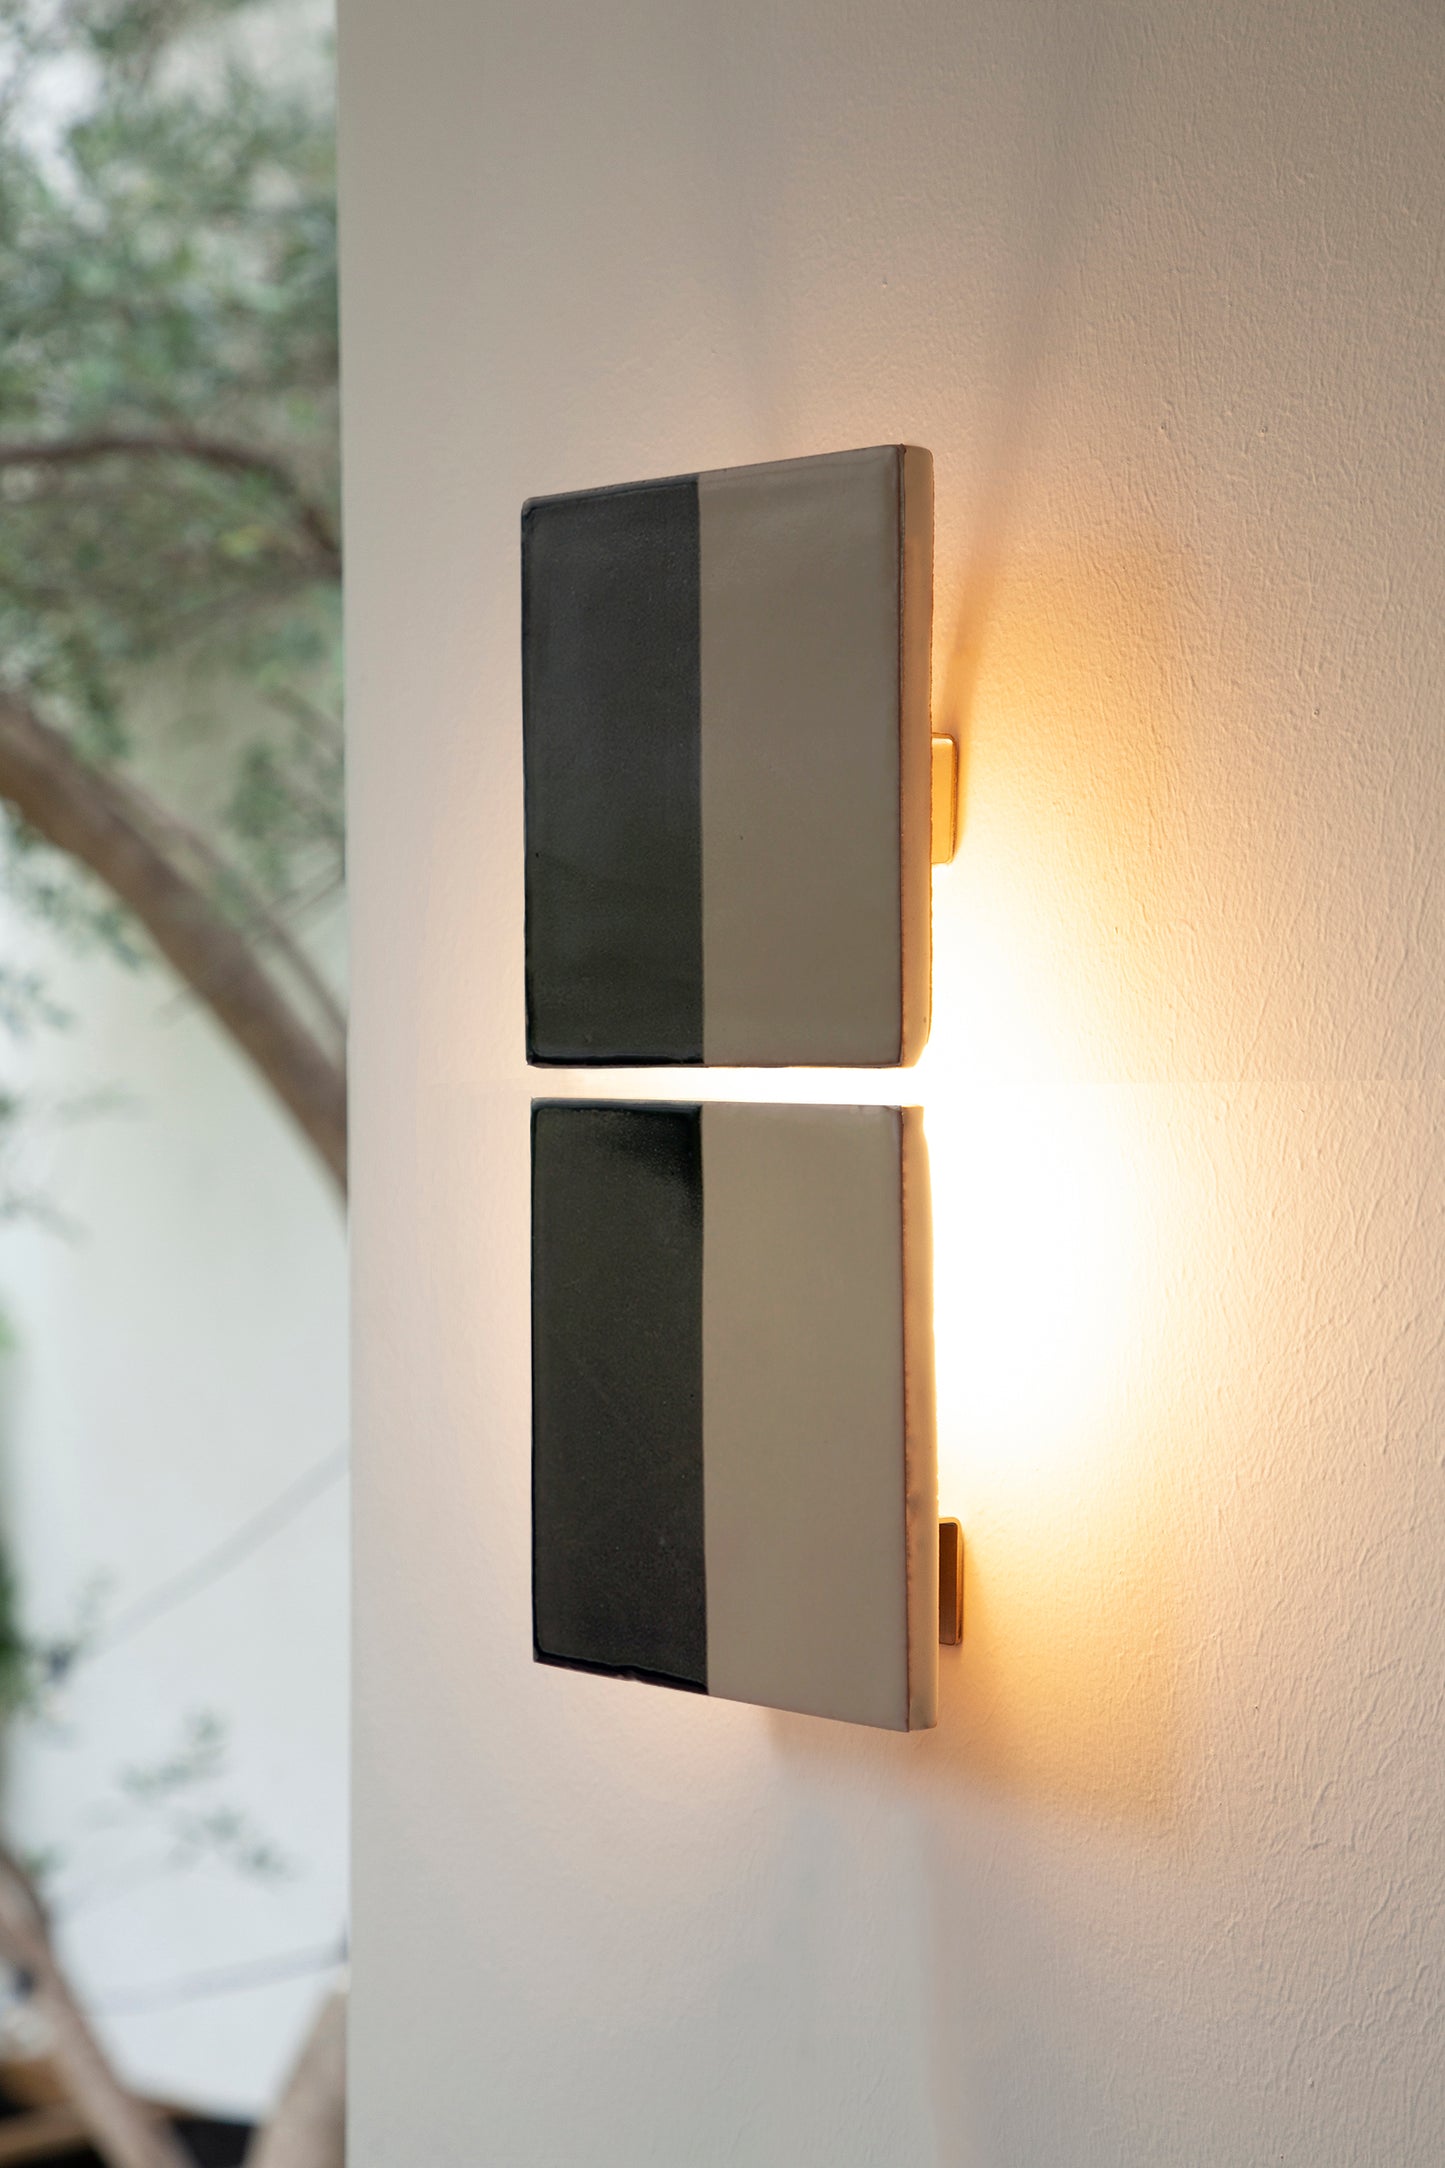 Tiles lines wall lamp